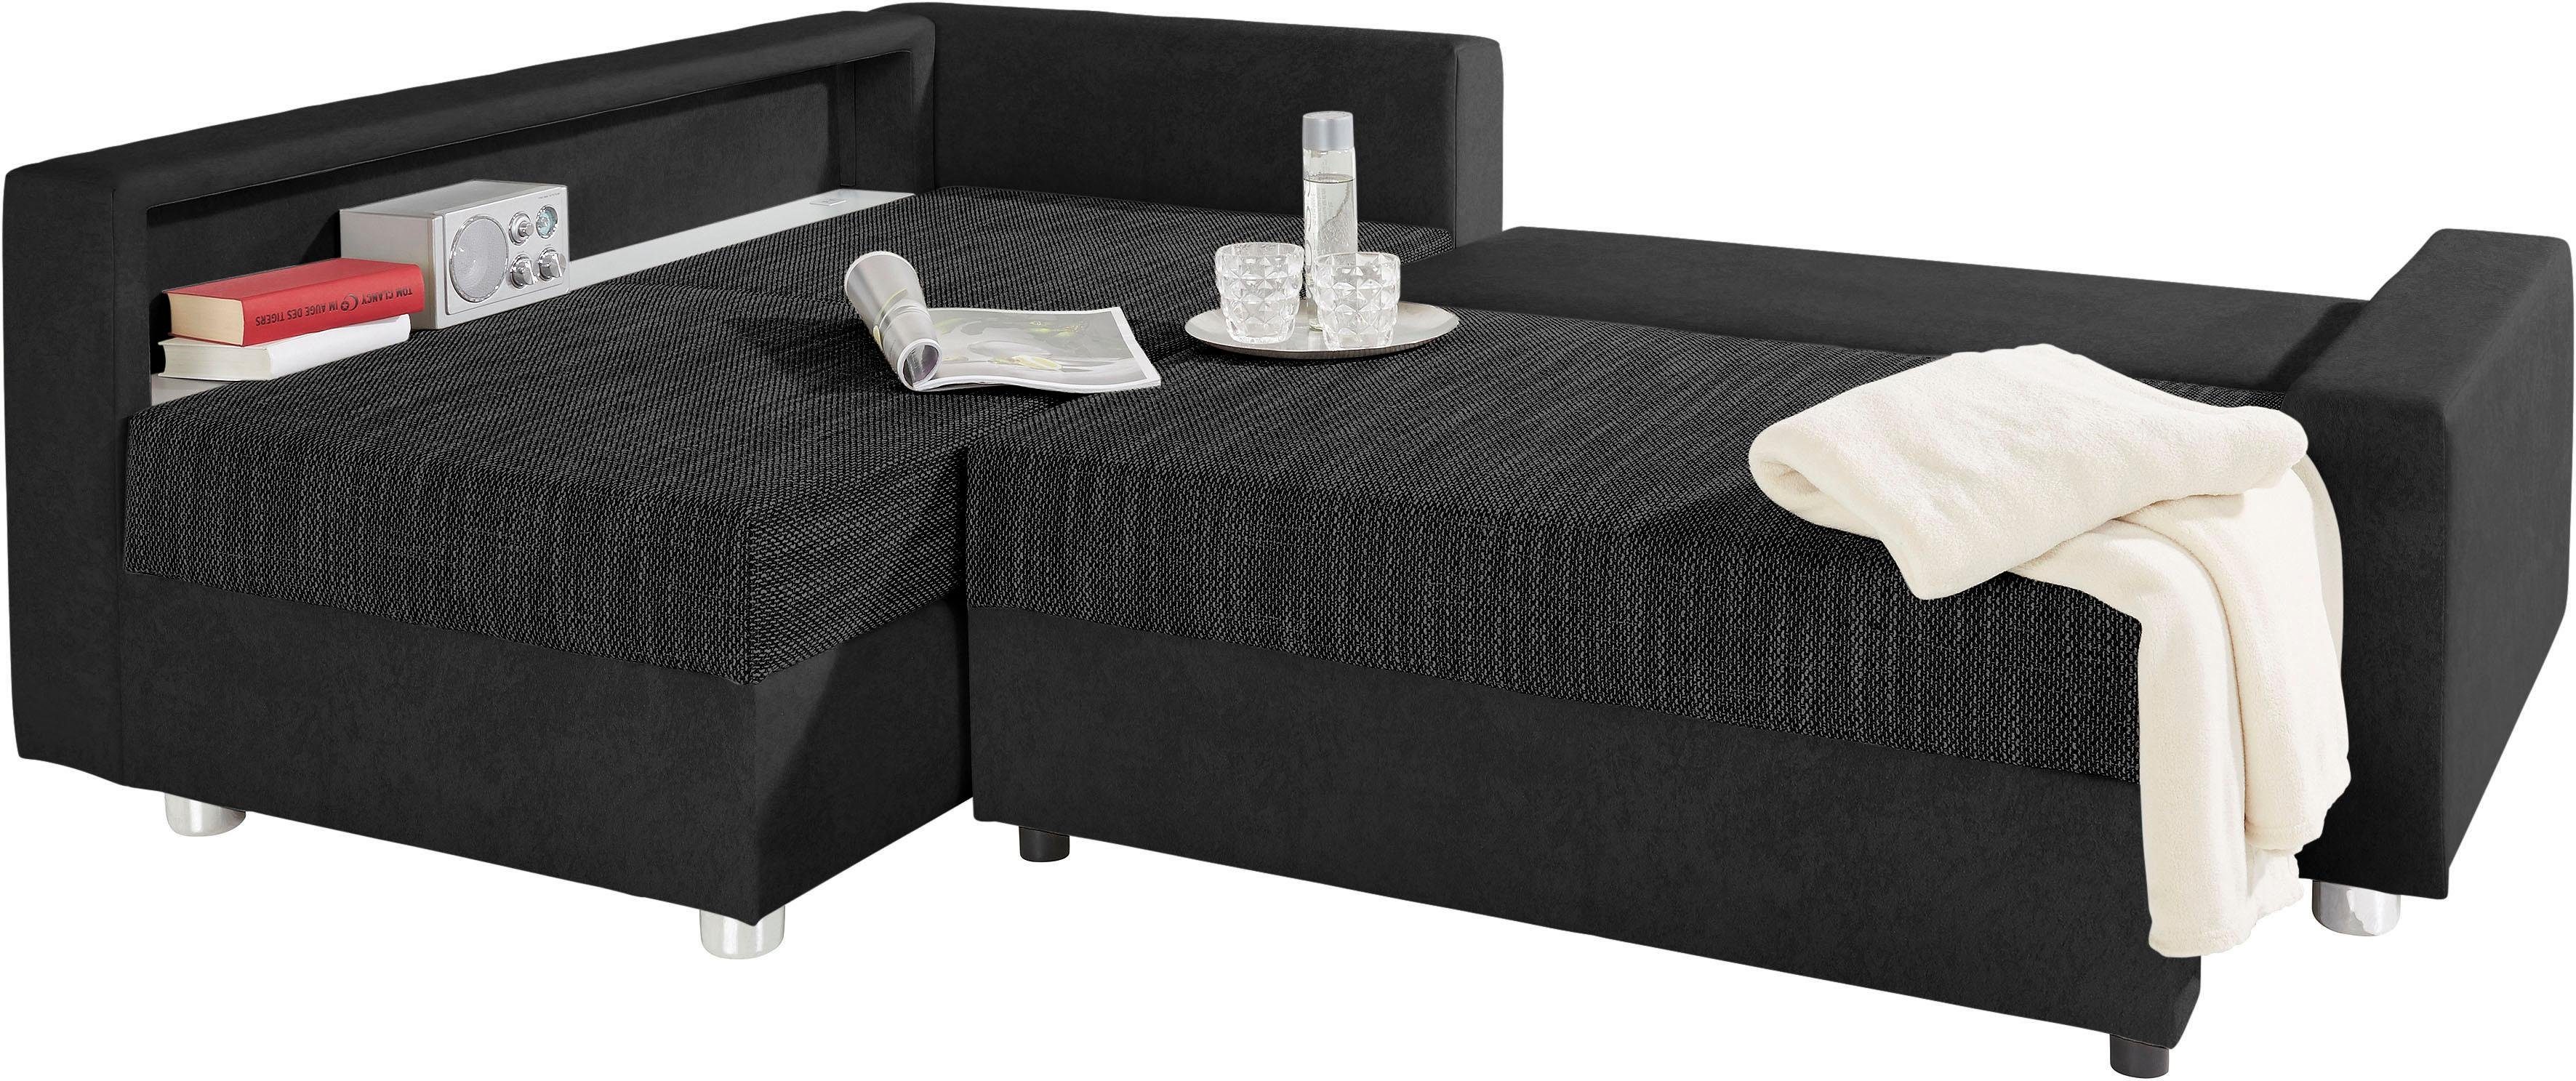 inklusive wahlweise Ecksofa COLLECTION Federkern, RGB-LED-Beleuchtung Bettfunktion, Relax, AB mit